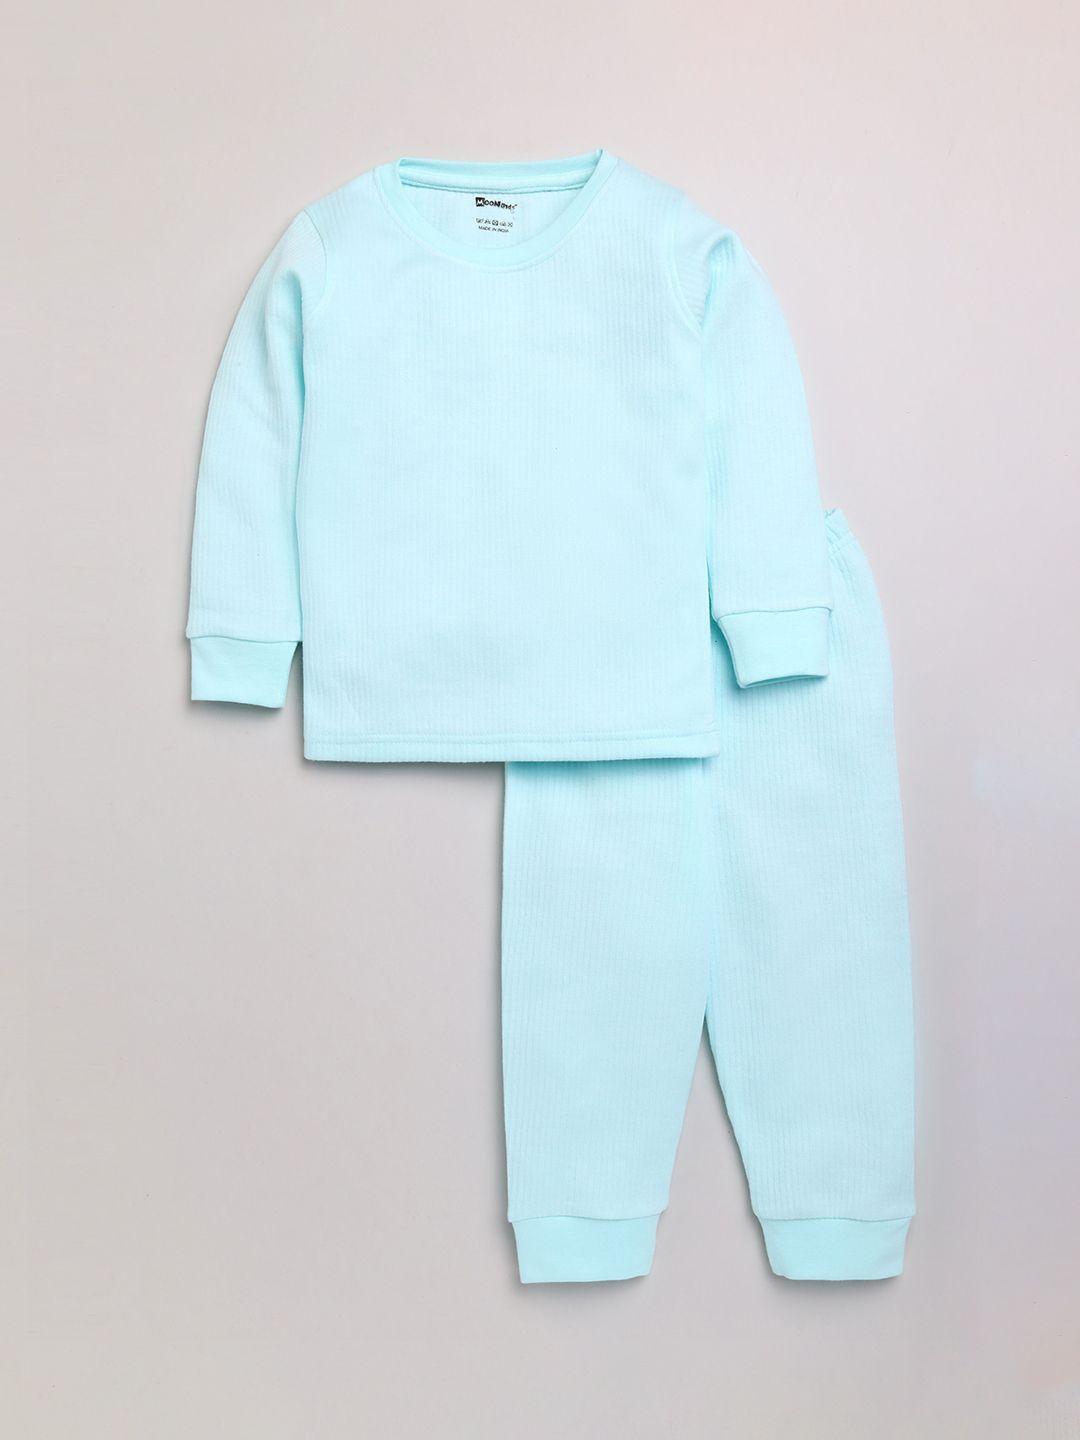 moonkids boys blue solid thermal set